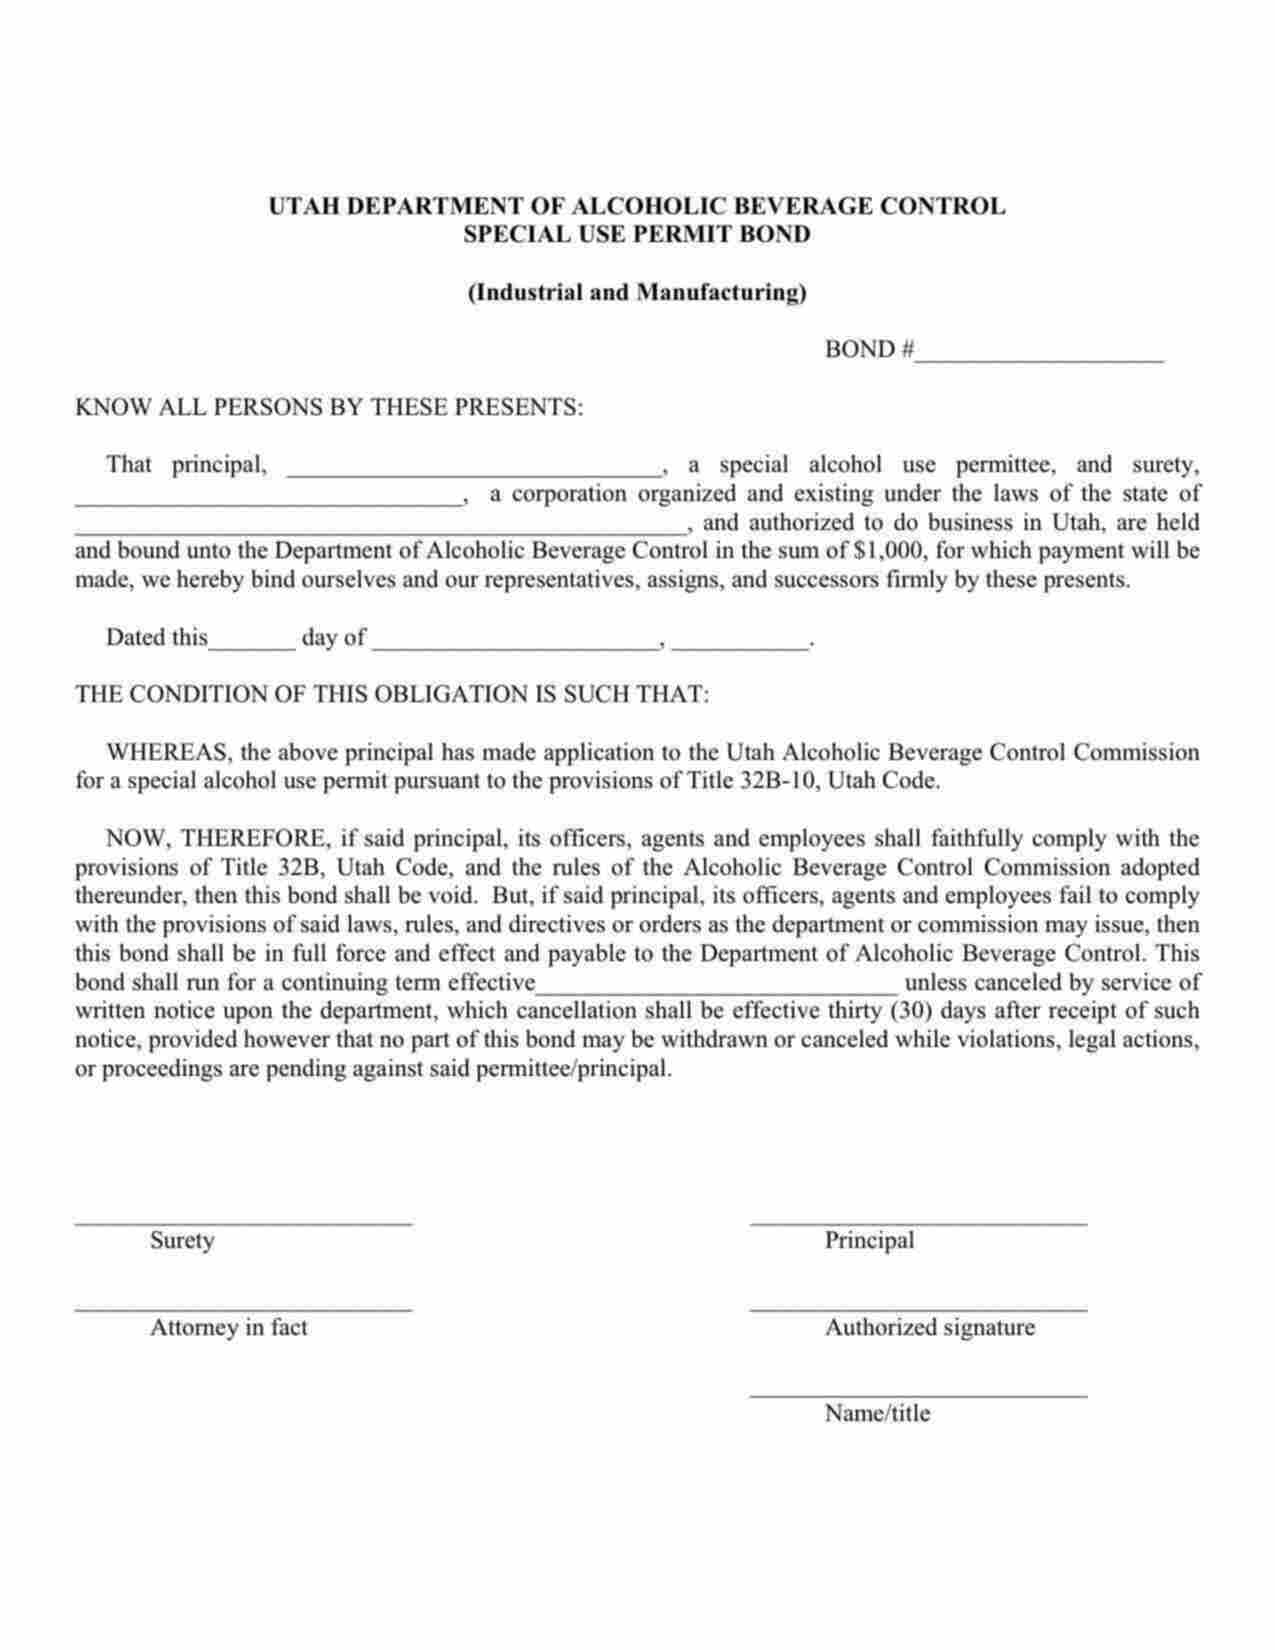 Utah Industrial and Manufacturing Alcohol (Special Use Permit) Bond Form